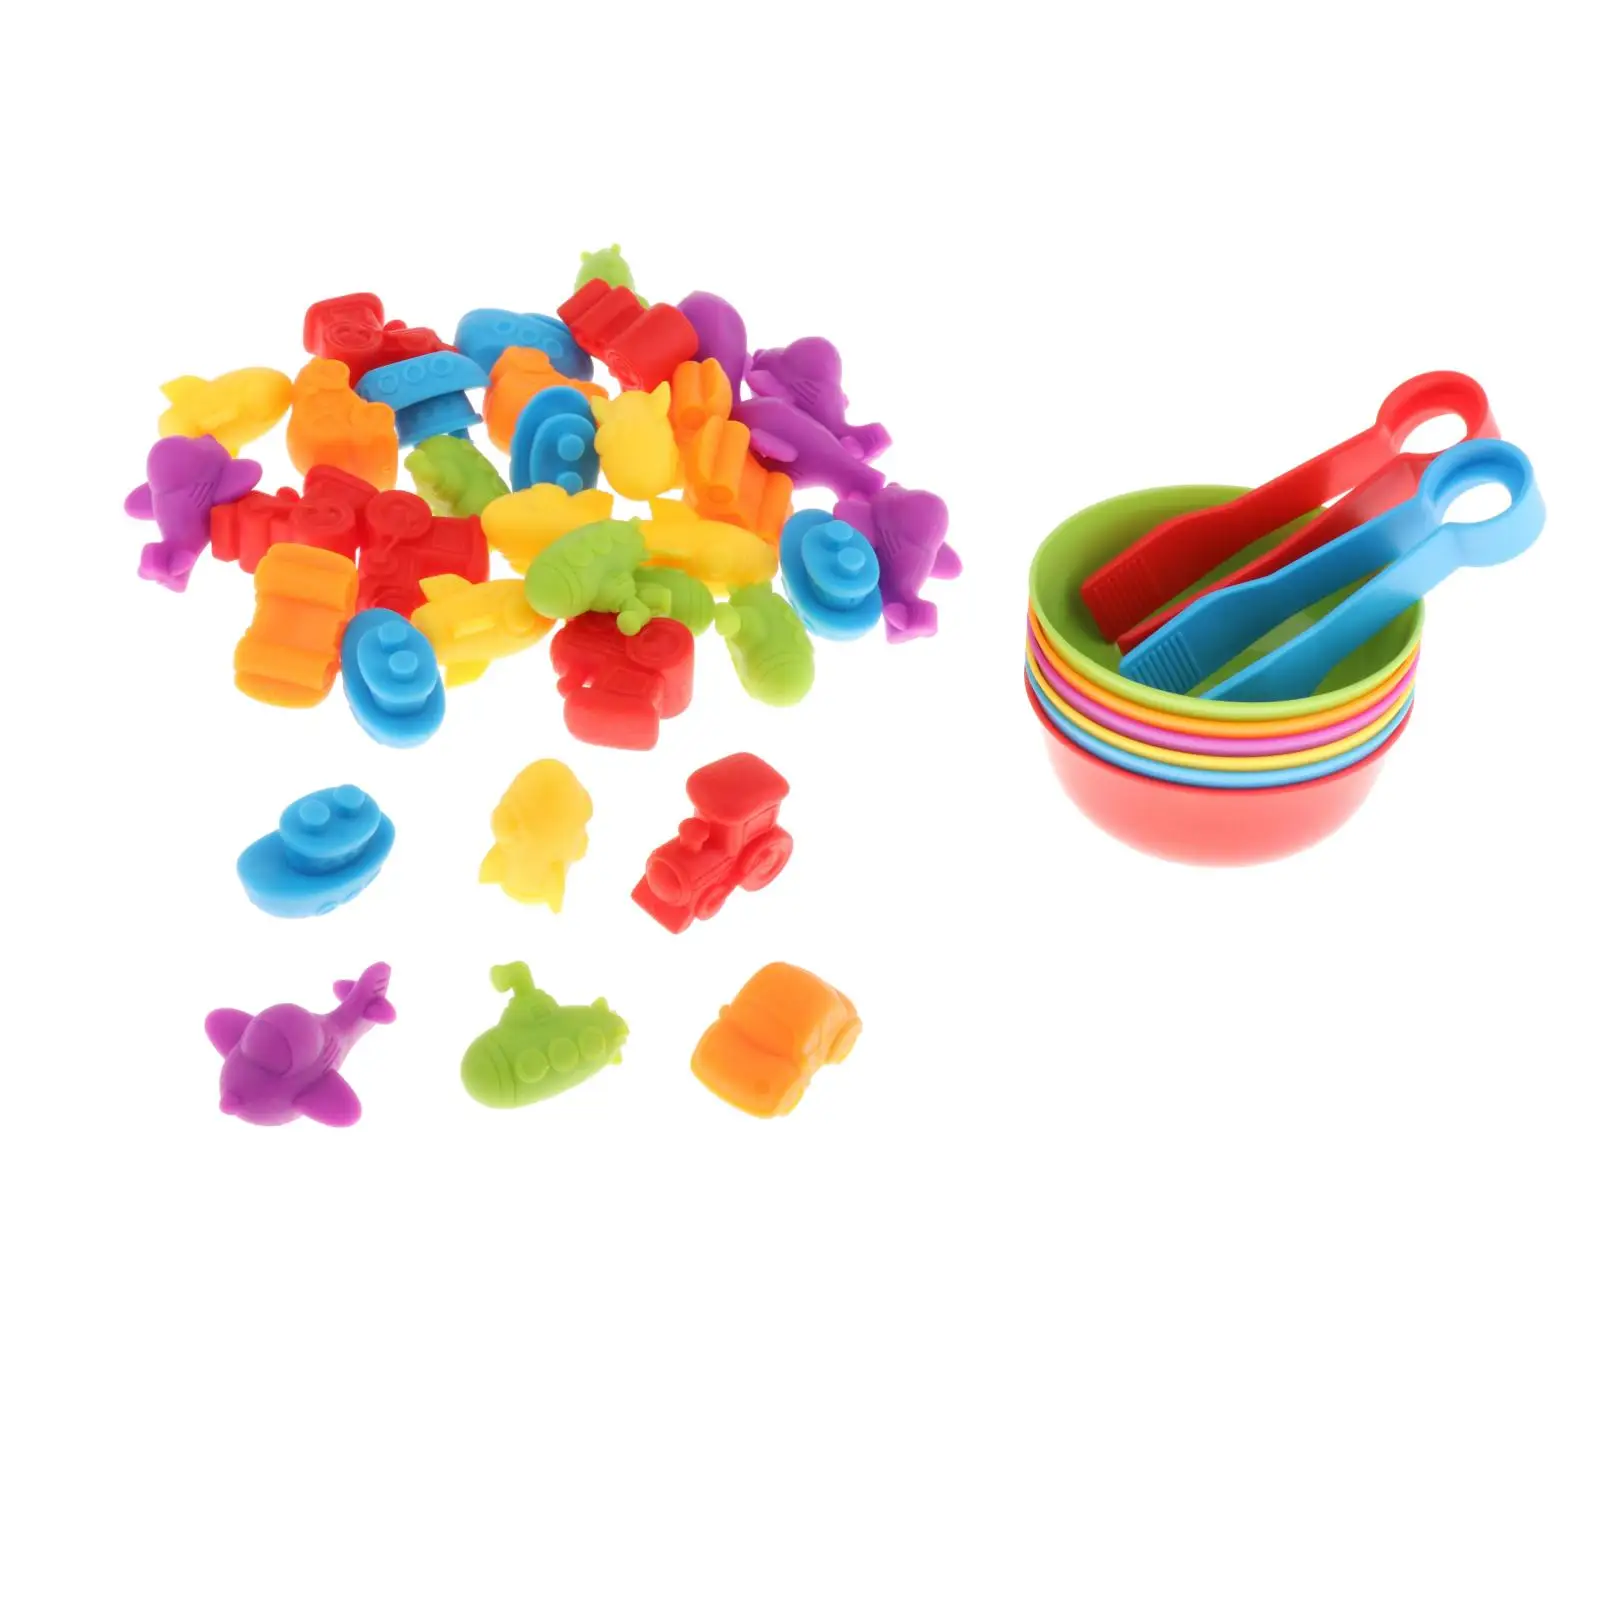 Colorful Sorting Toys with Bowls Learning Toys Math Learning for Child Girls